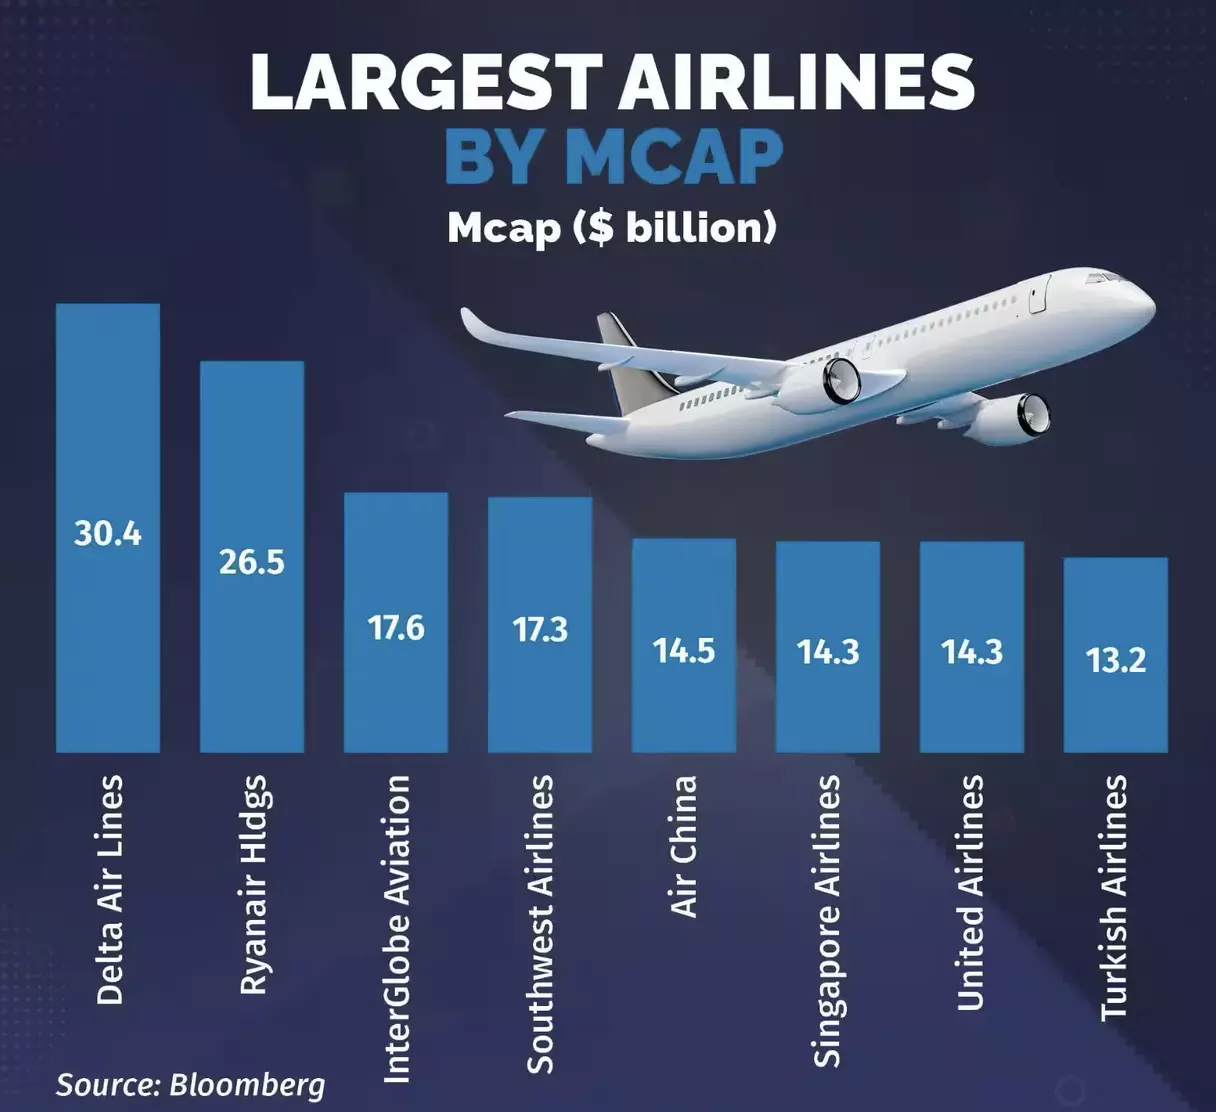 IndiGo is now the worlds third-largest airline by market cap